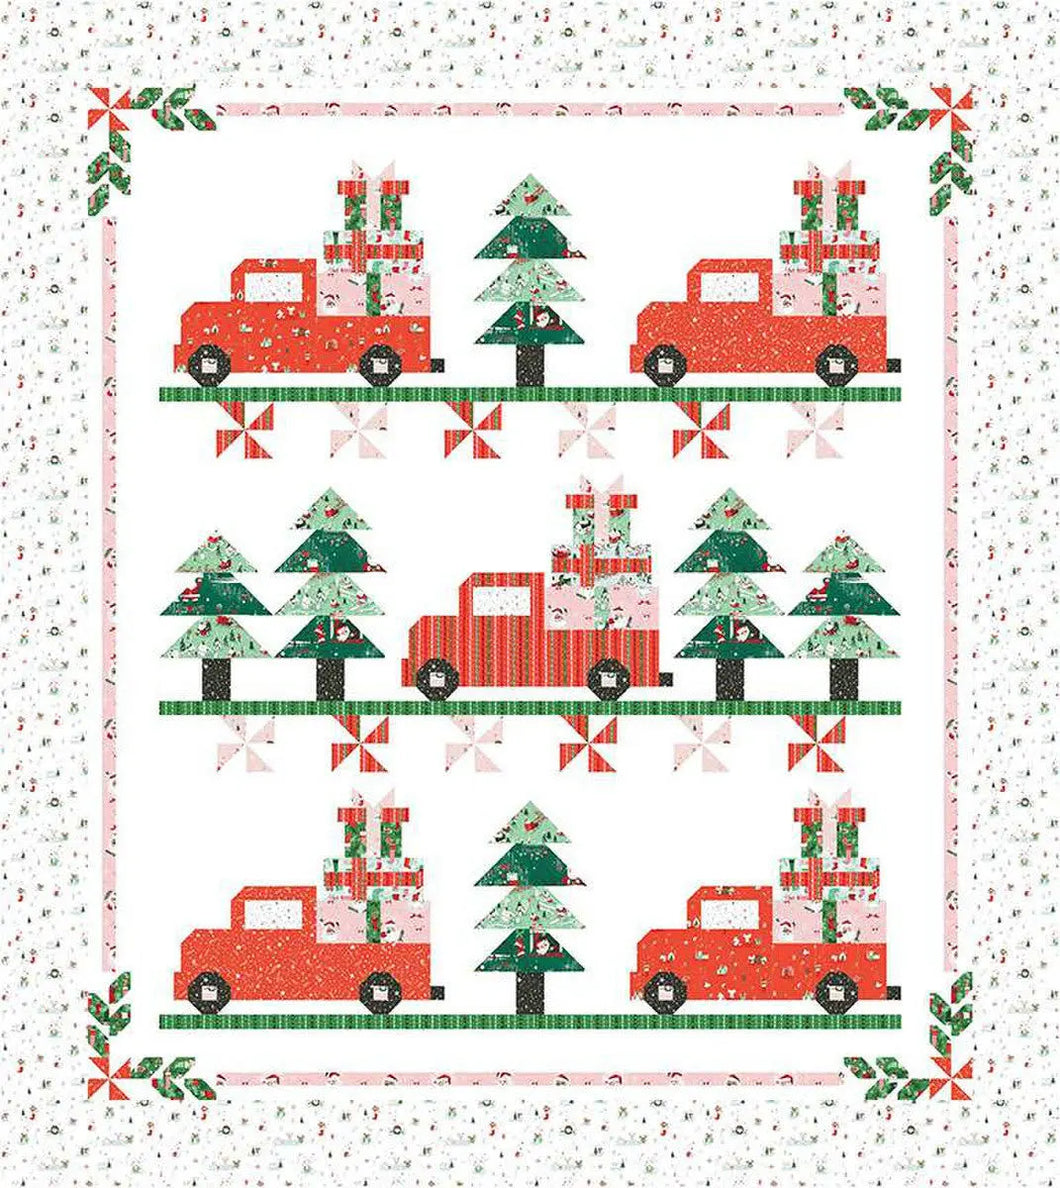 Vintage Christmas 2 Quilt Pattern Designed by Erica Made with Riley Blake Designs